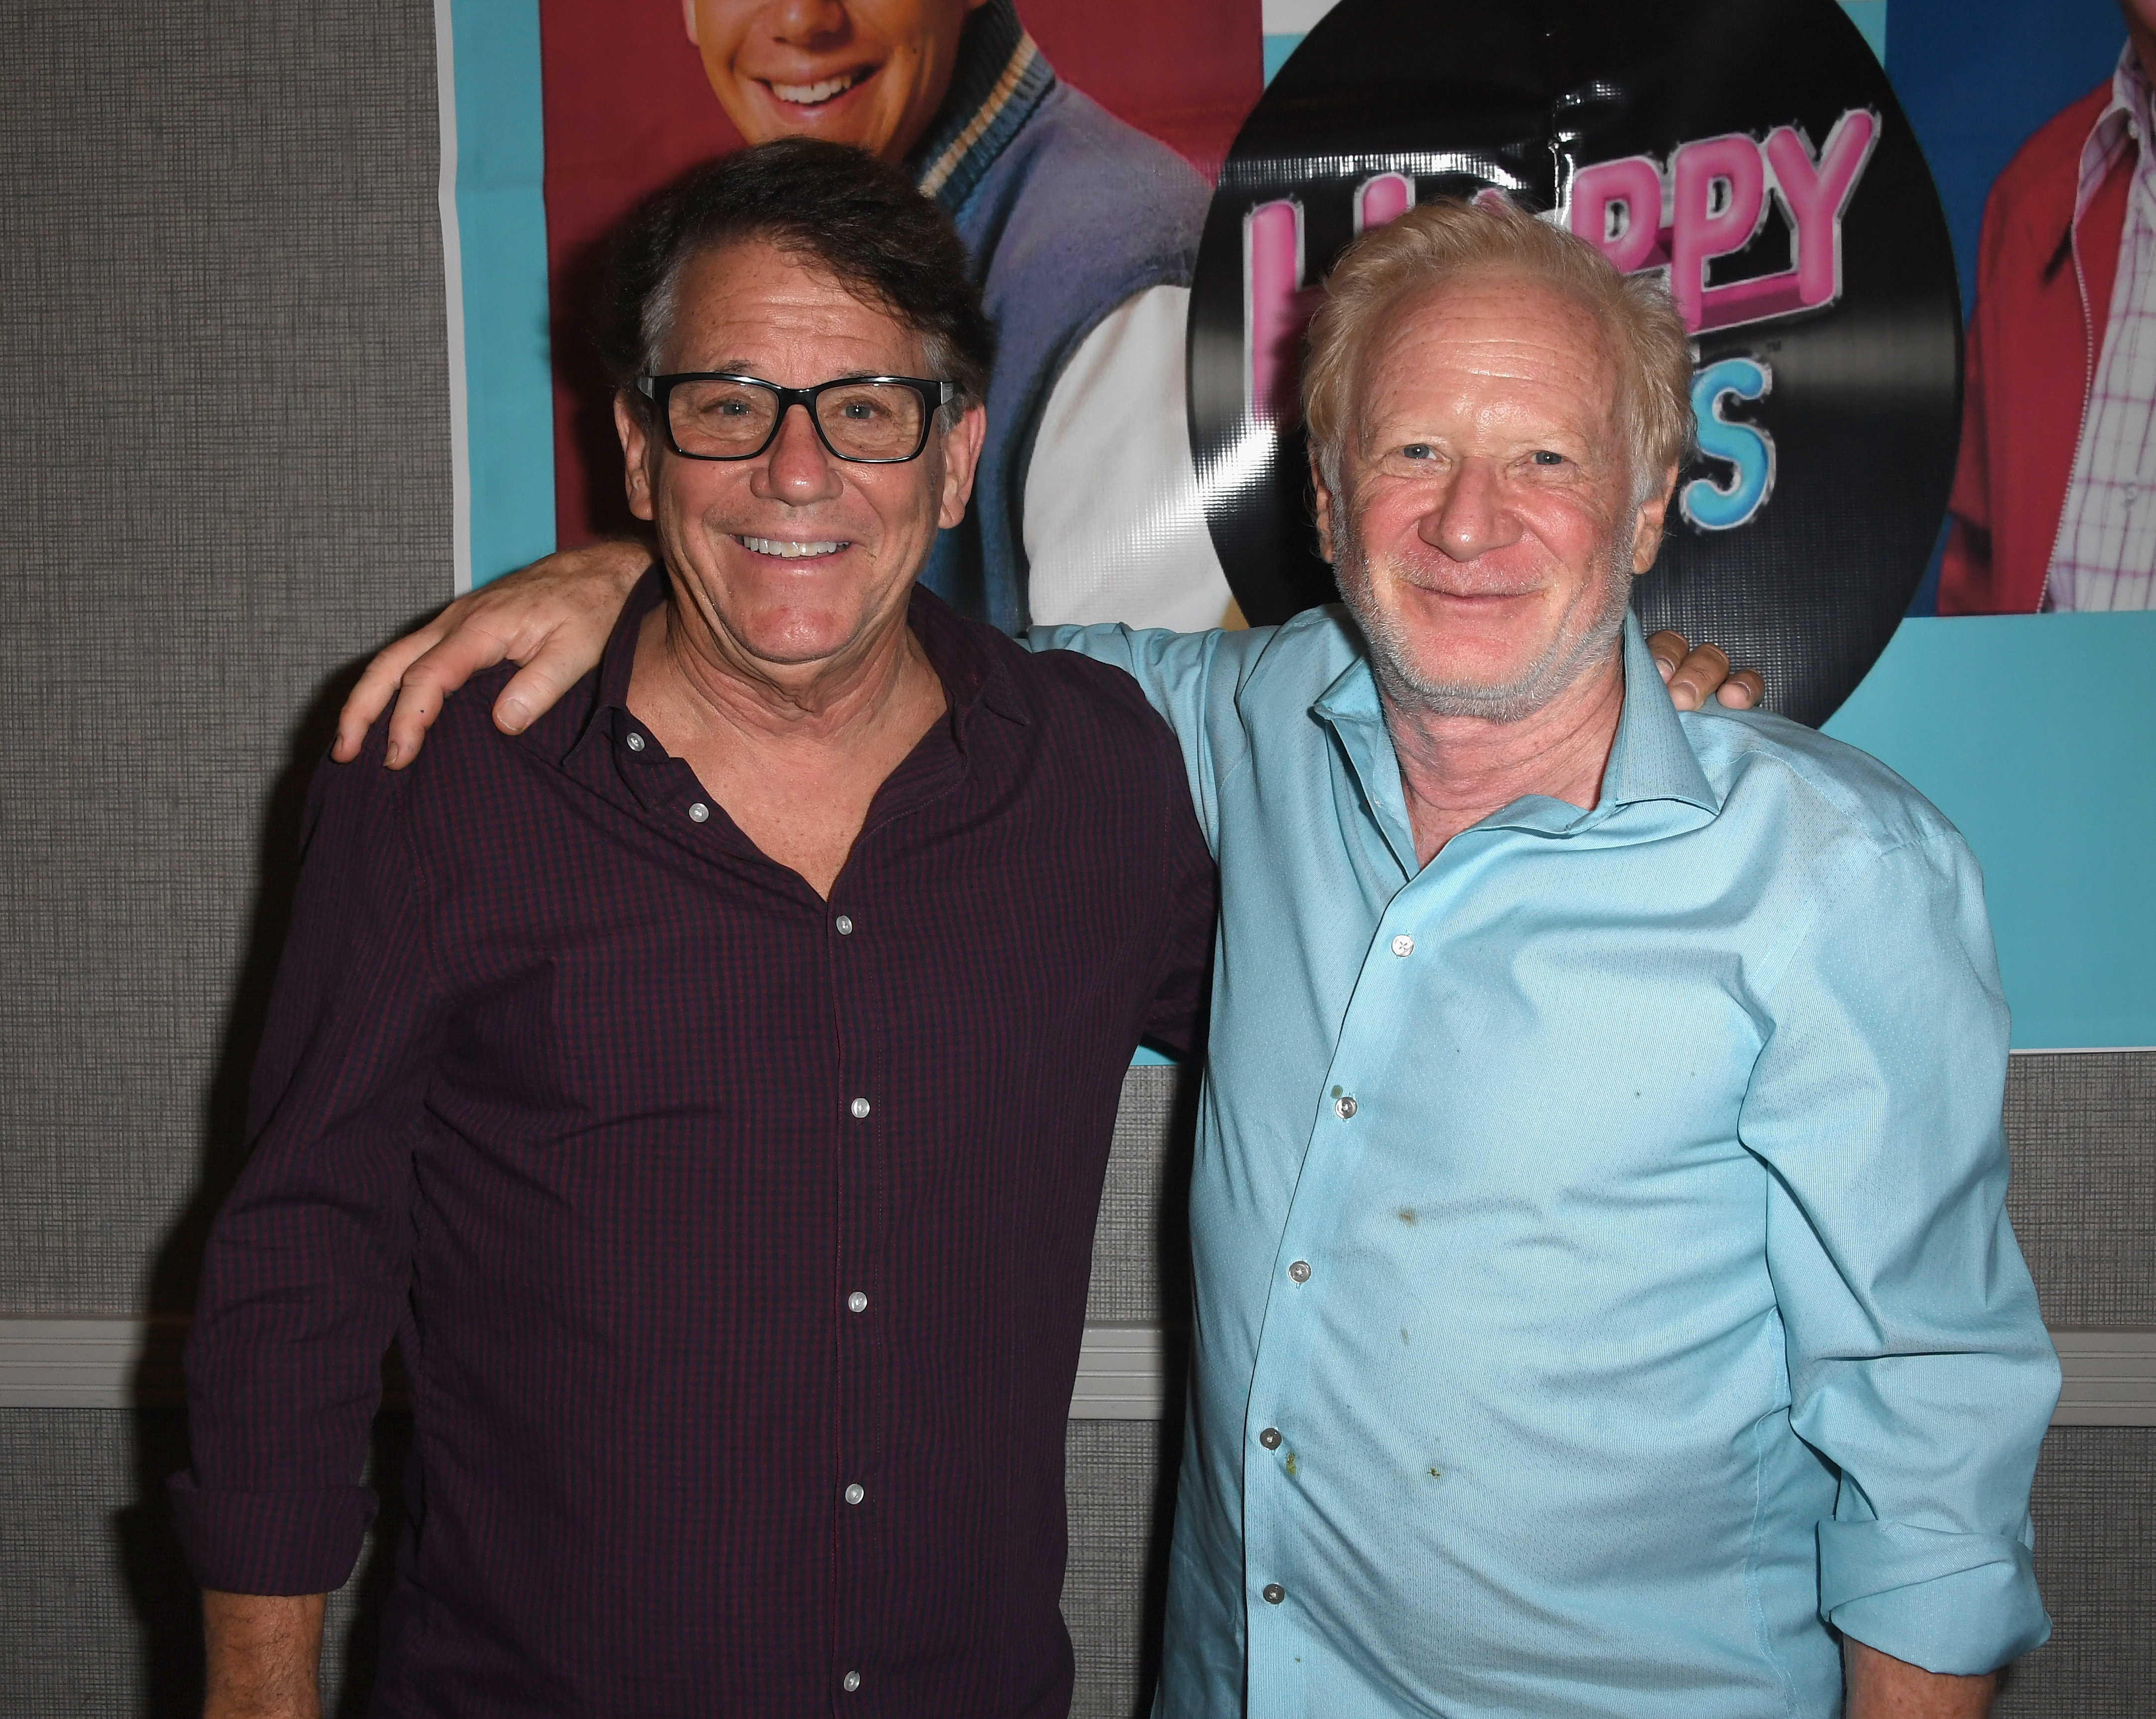 Anson Williams and Donny Most on July 2, 2022 in Burbank, California. | Source: Getty Images